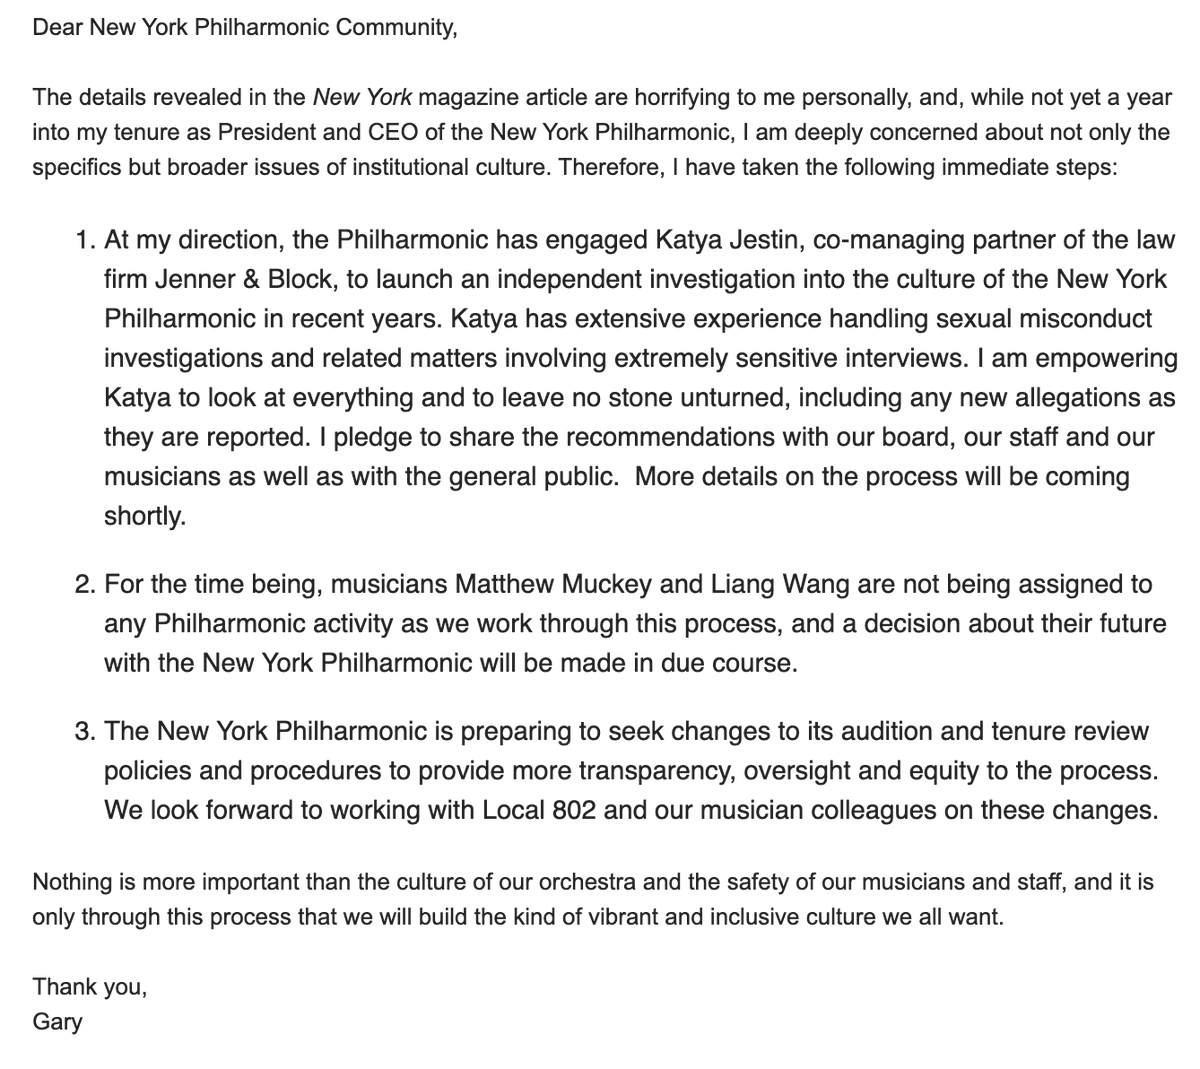 #BREAKING: @nyphil has released the following email sent to the orchestra's board, musicians and staff by their president, Gary Ginstling. To summarize: @nyphil has retained @JennerBlockLLP to investigate the orchestra's recent culture. The results will be released publicly.